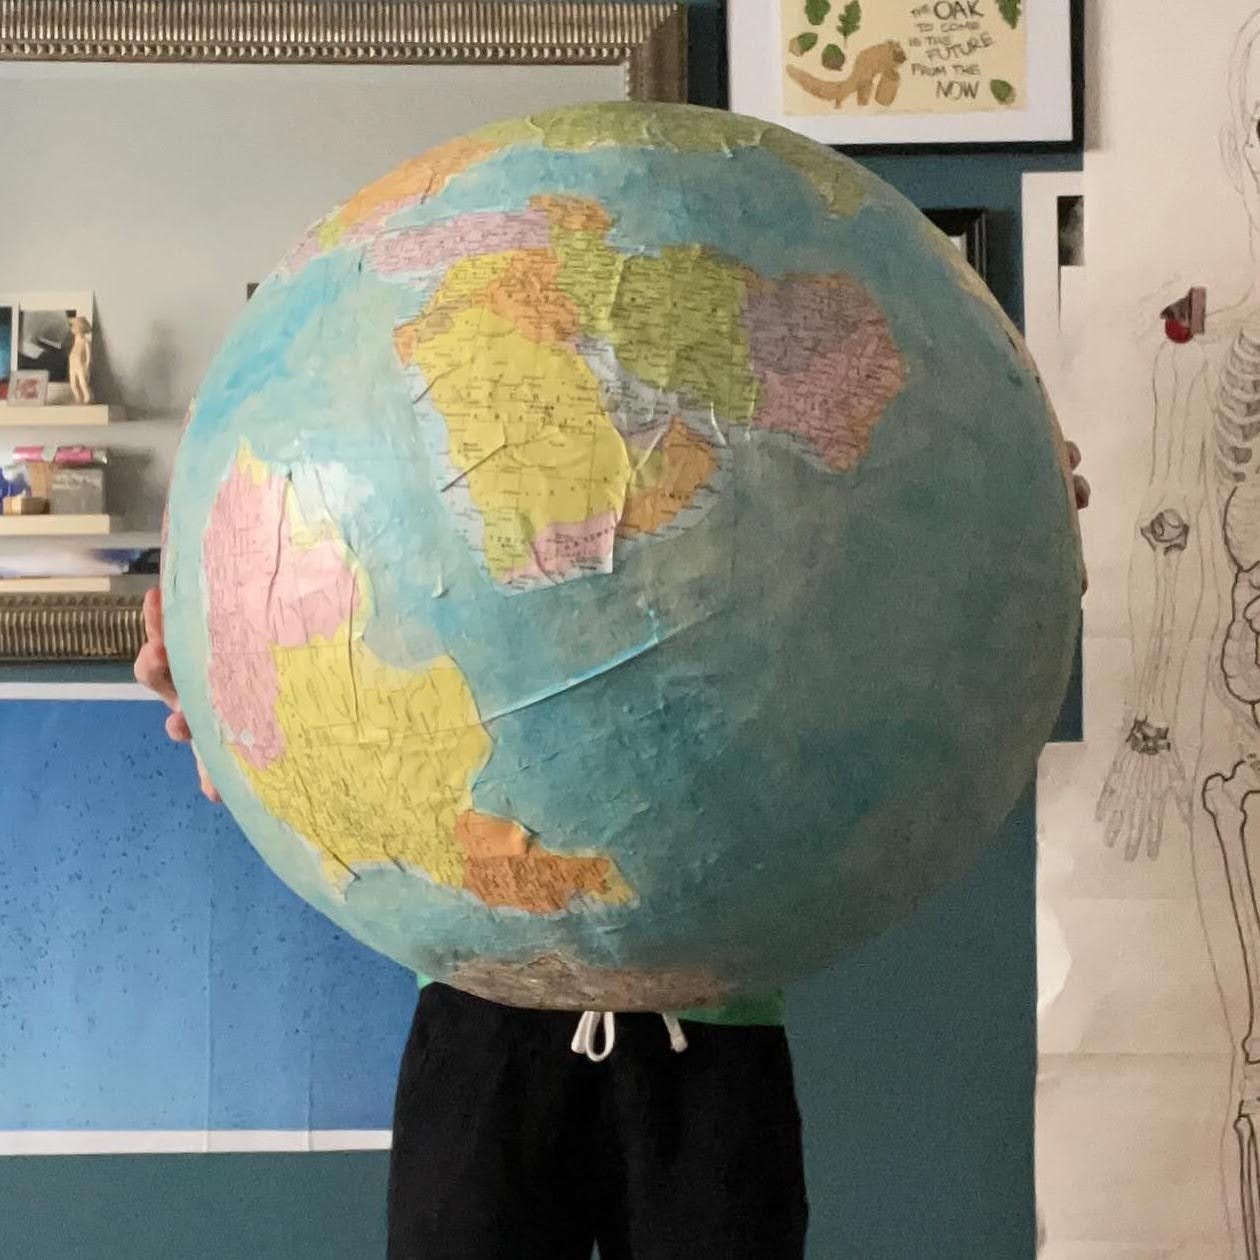 image of a white woman holding an enormous, paper mache globe pinata; the globe obscures the upper half of her body and is geographically inaccurate, with collaged imagined geographies